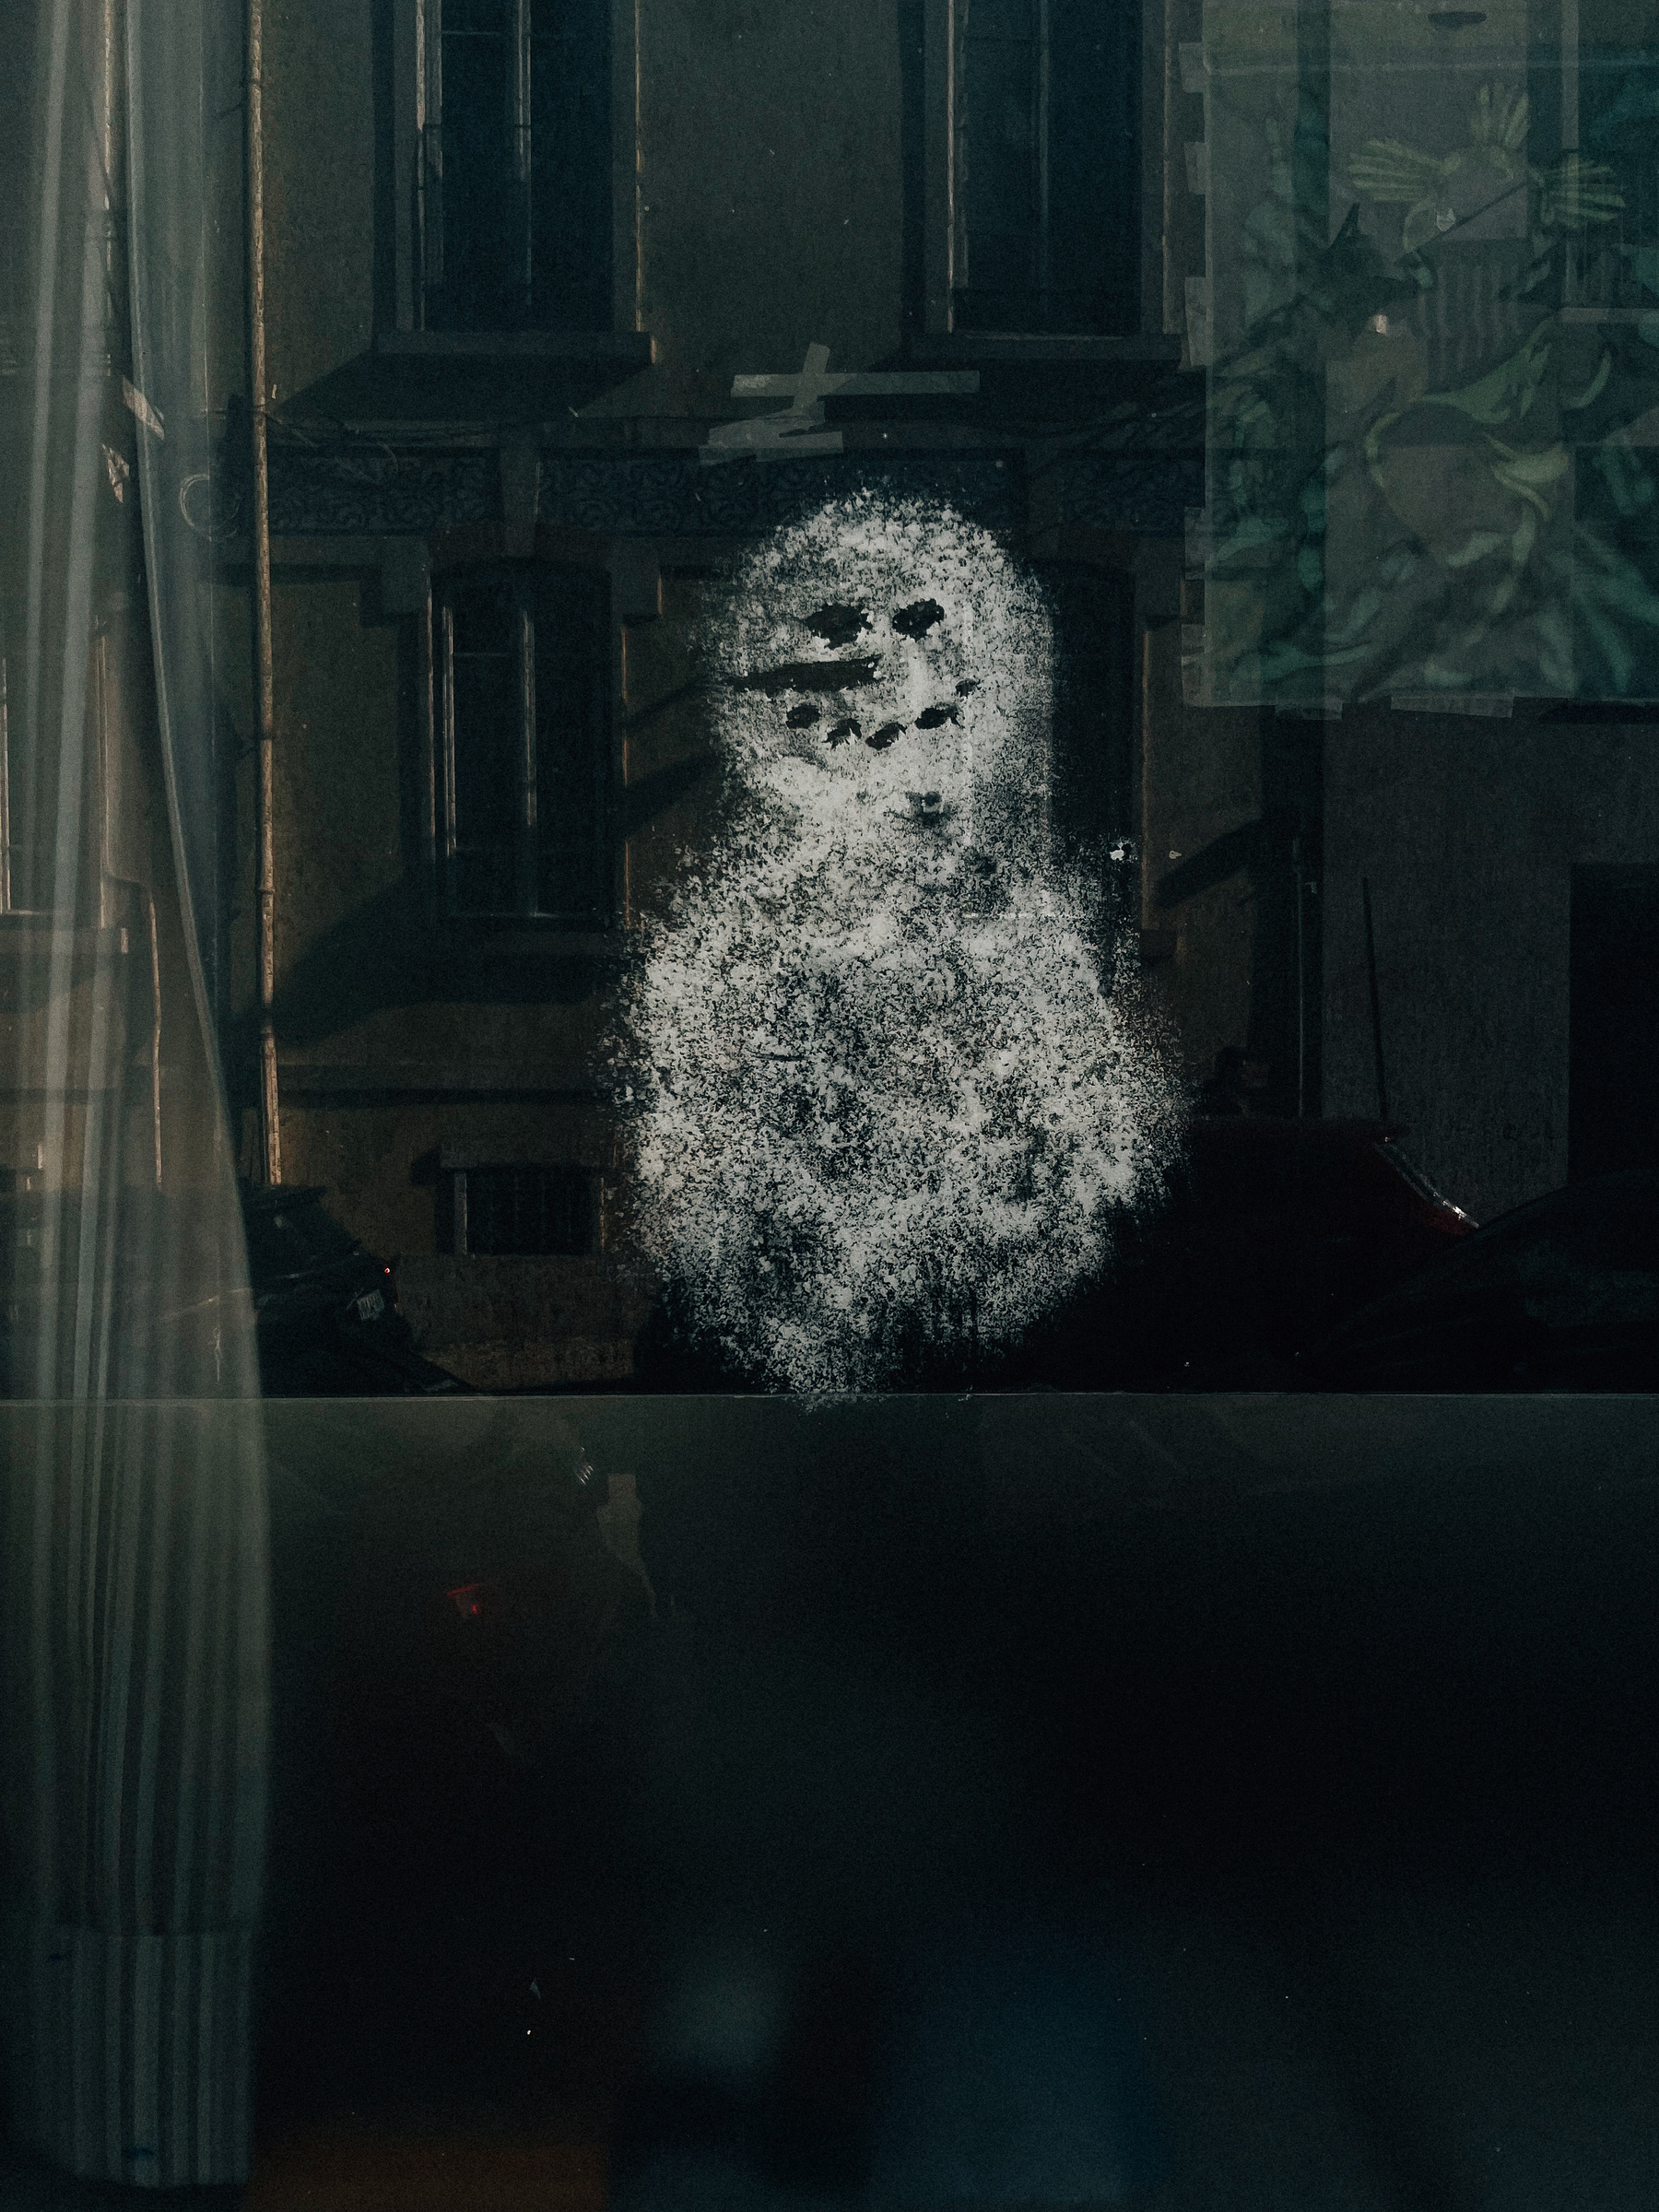 A mysterious silhouette of a snowman appears on a glass pane, with the reflection of a building and parked cars in the background.